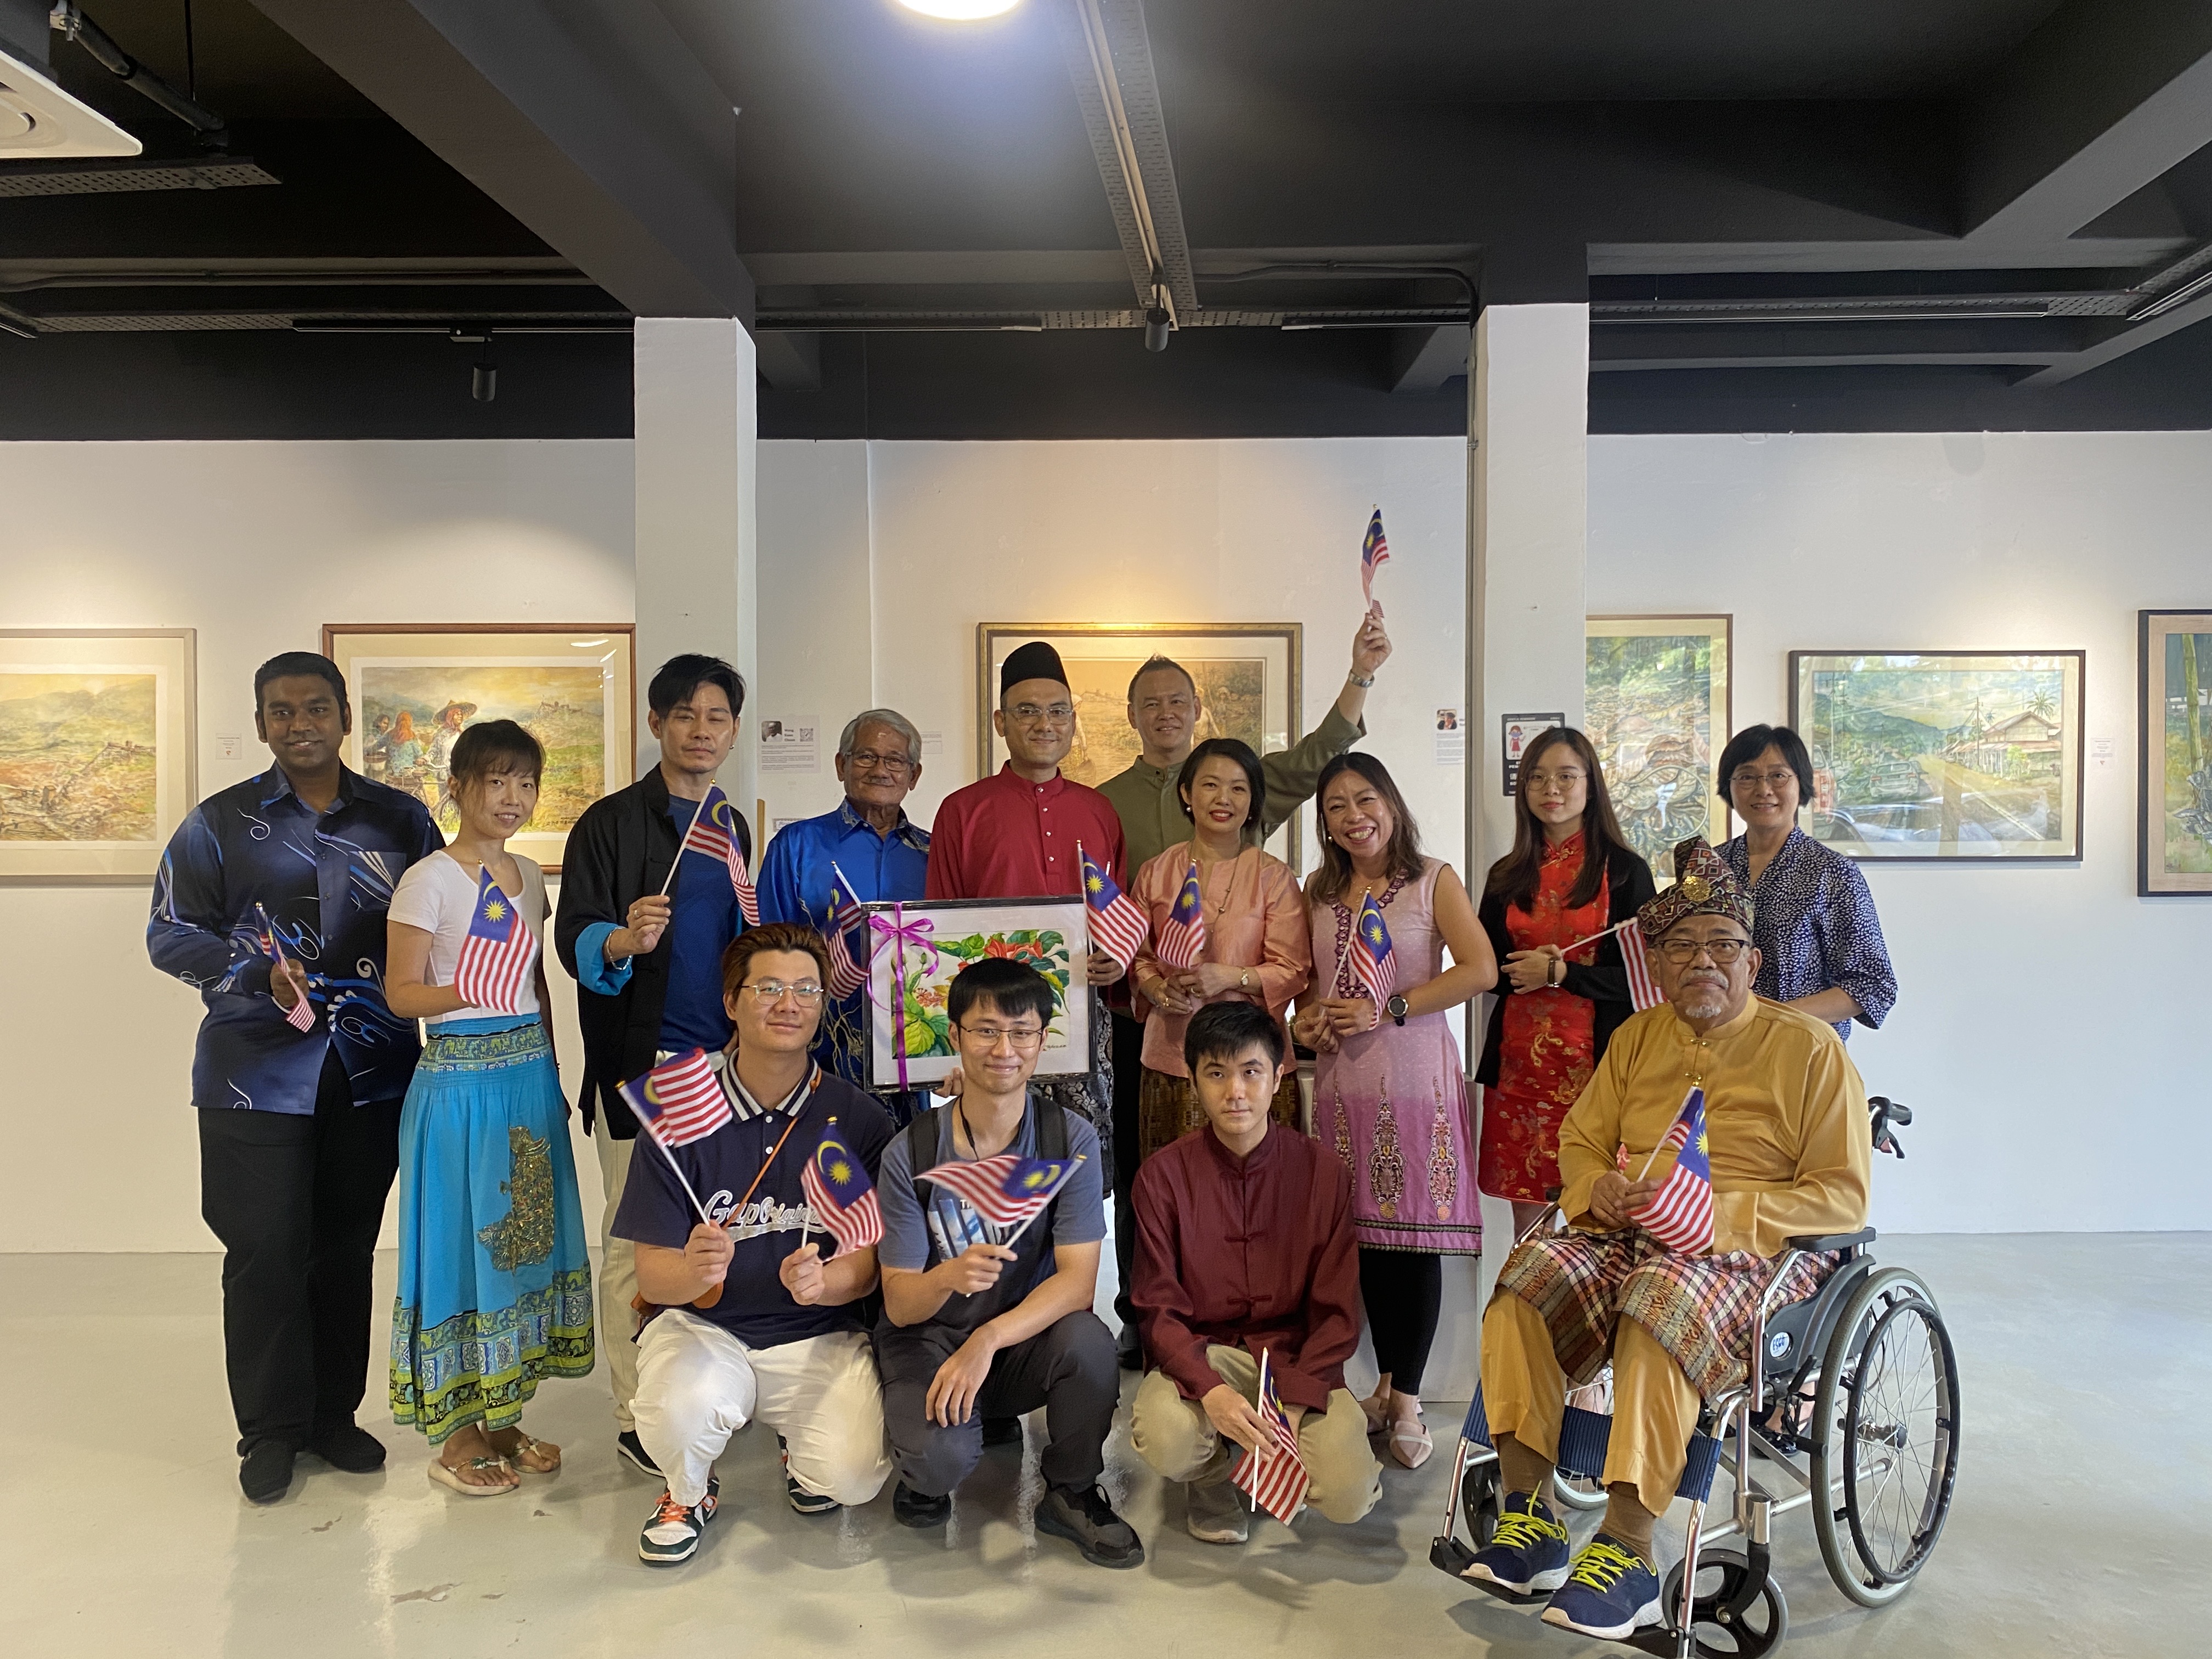 Timeless Memories Exhibition Opening: A Celebration of Unity, Diversity, and Artistry